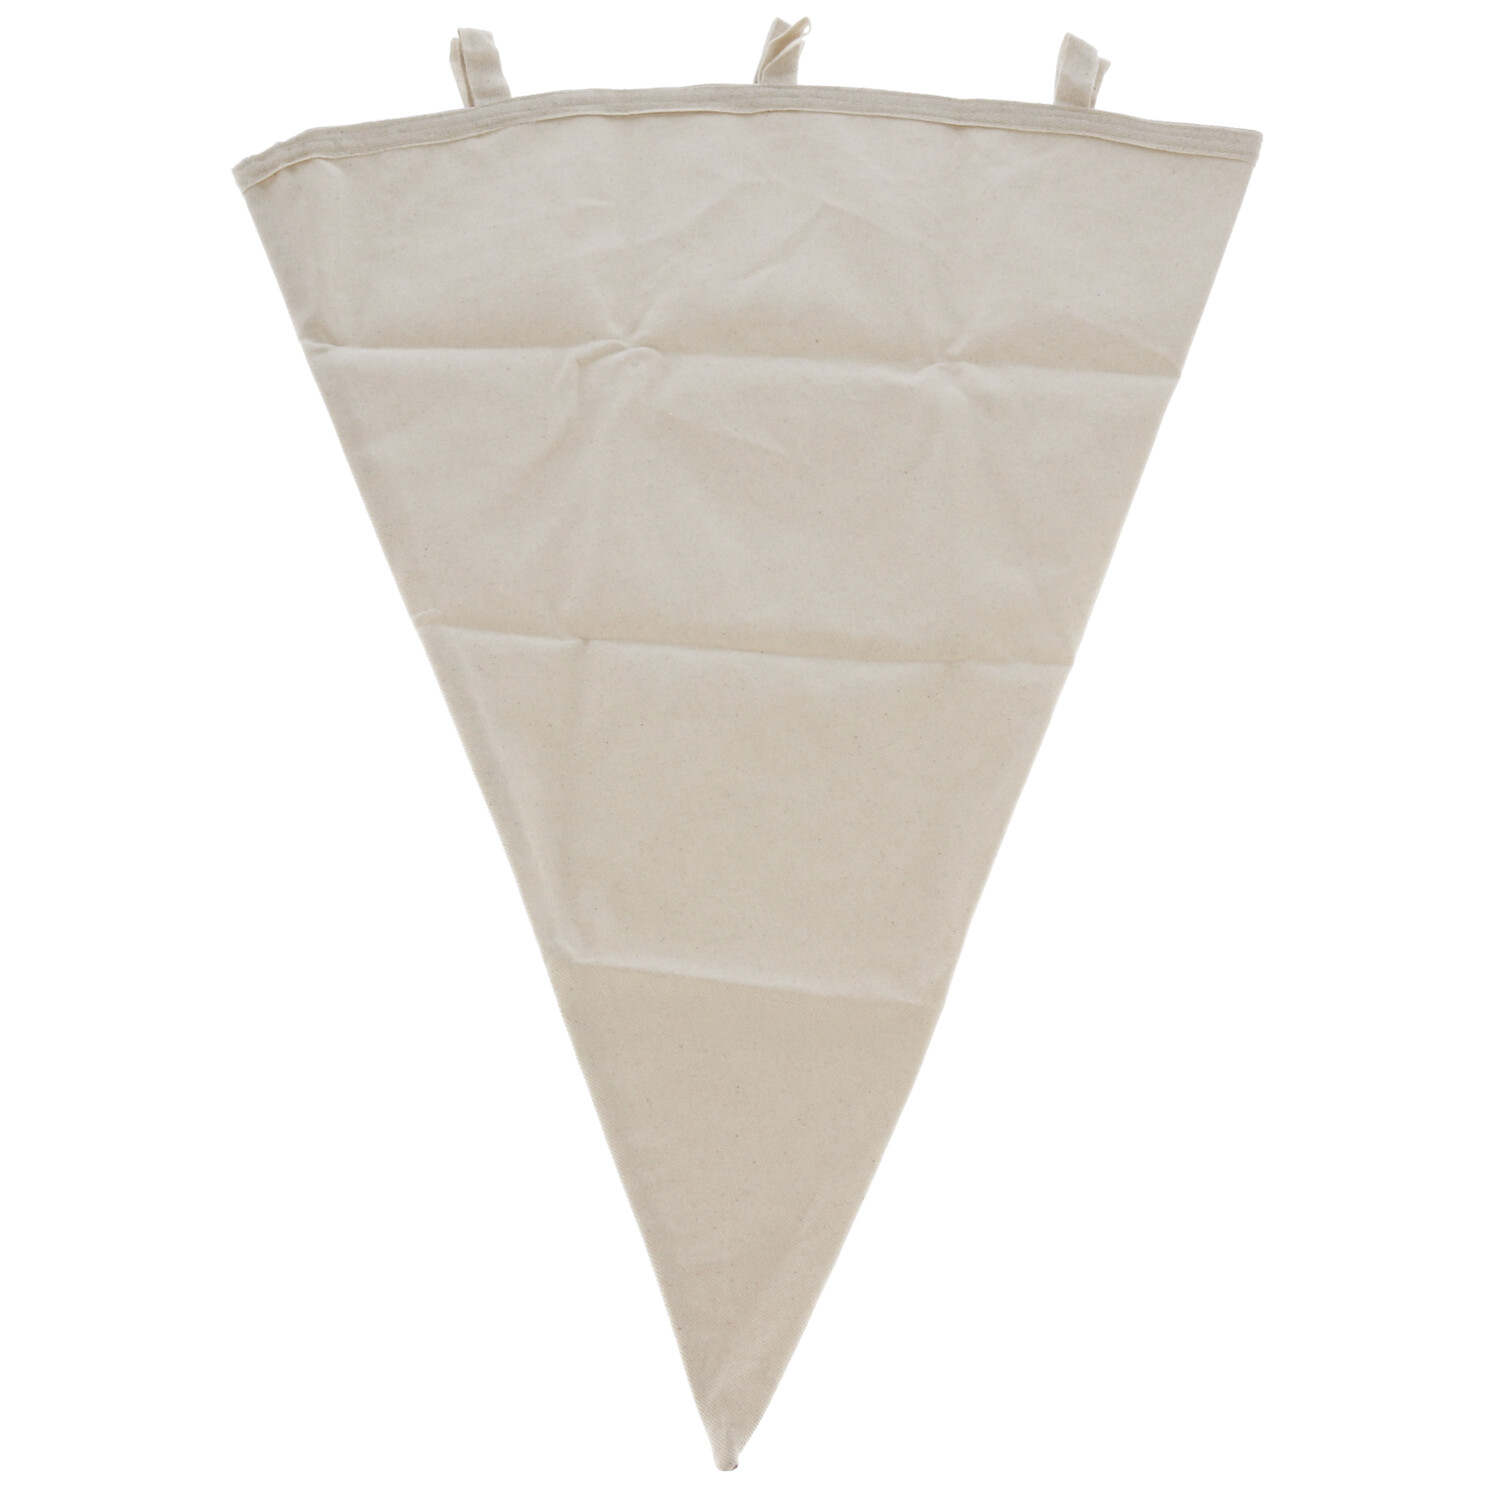 Cotton Filter cone shaped 40l